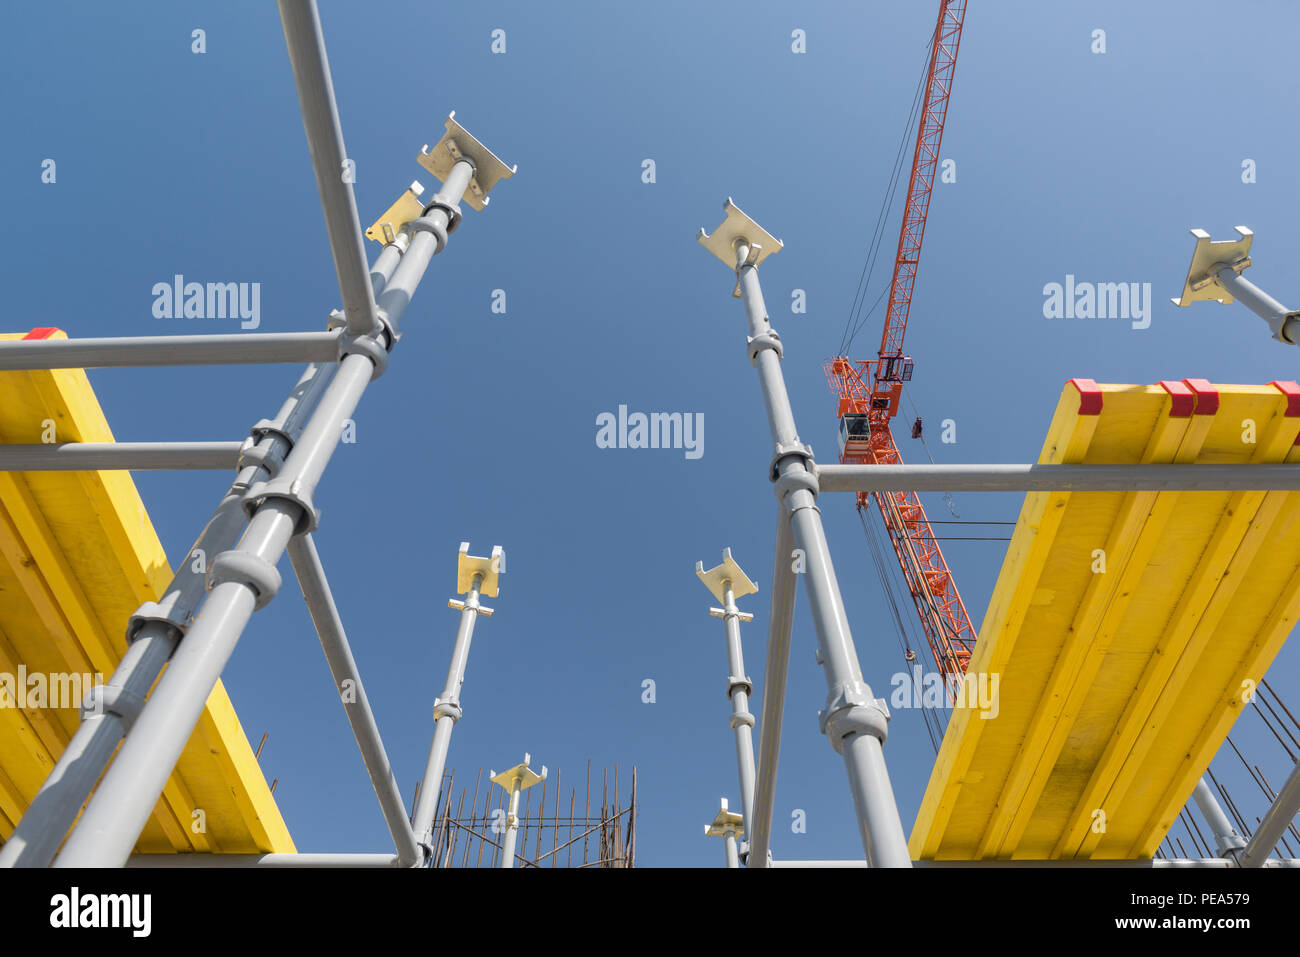 metal concrete structures of the building under construction. scaffolding and supports on a crane background. bottom view Stock Photo